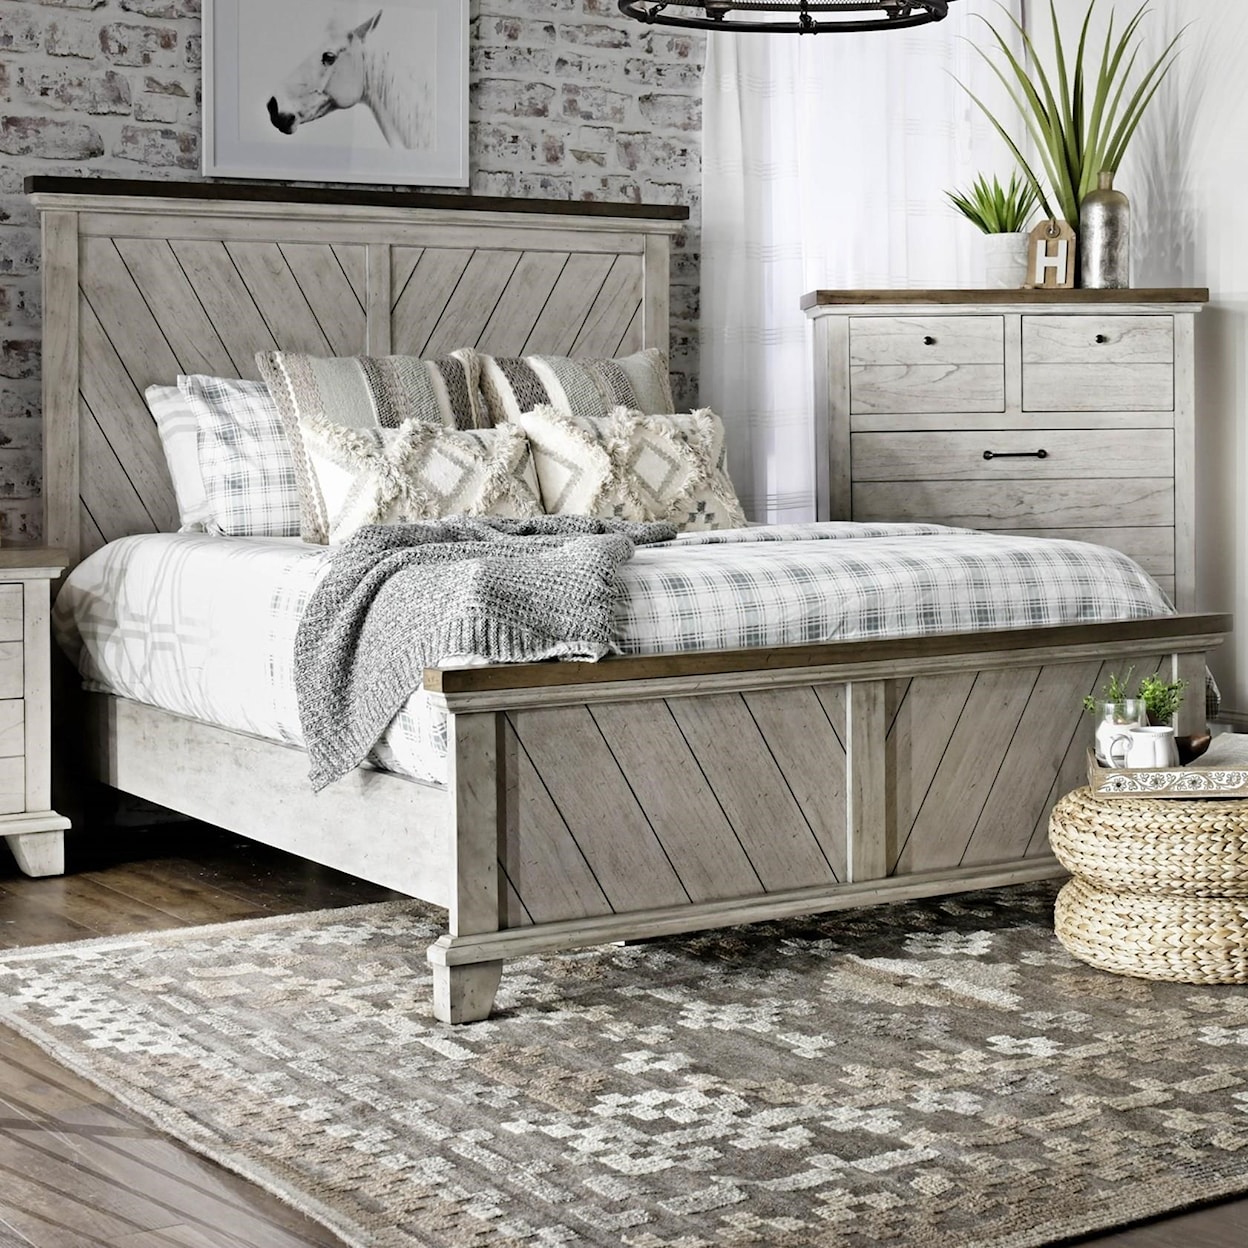 Steve Silver Grizzley Creek GRIZZLEY CREEK WHITE QUEEN BED |